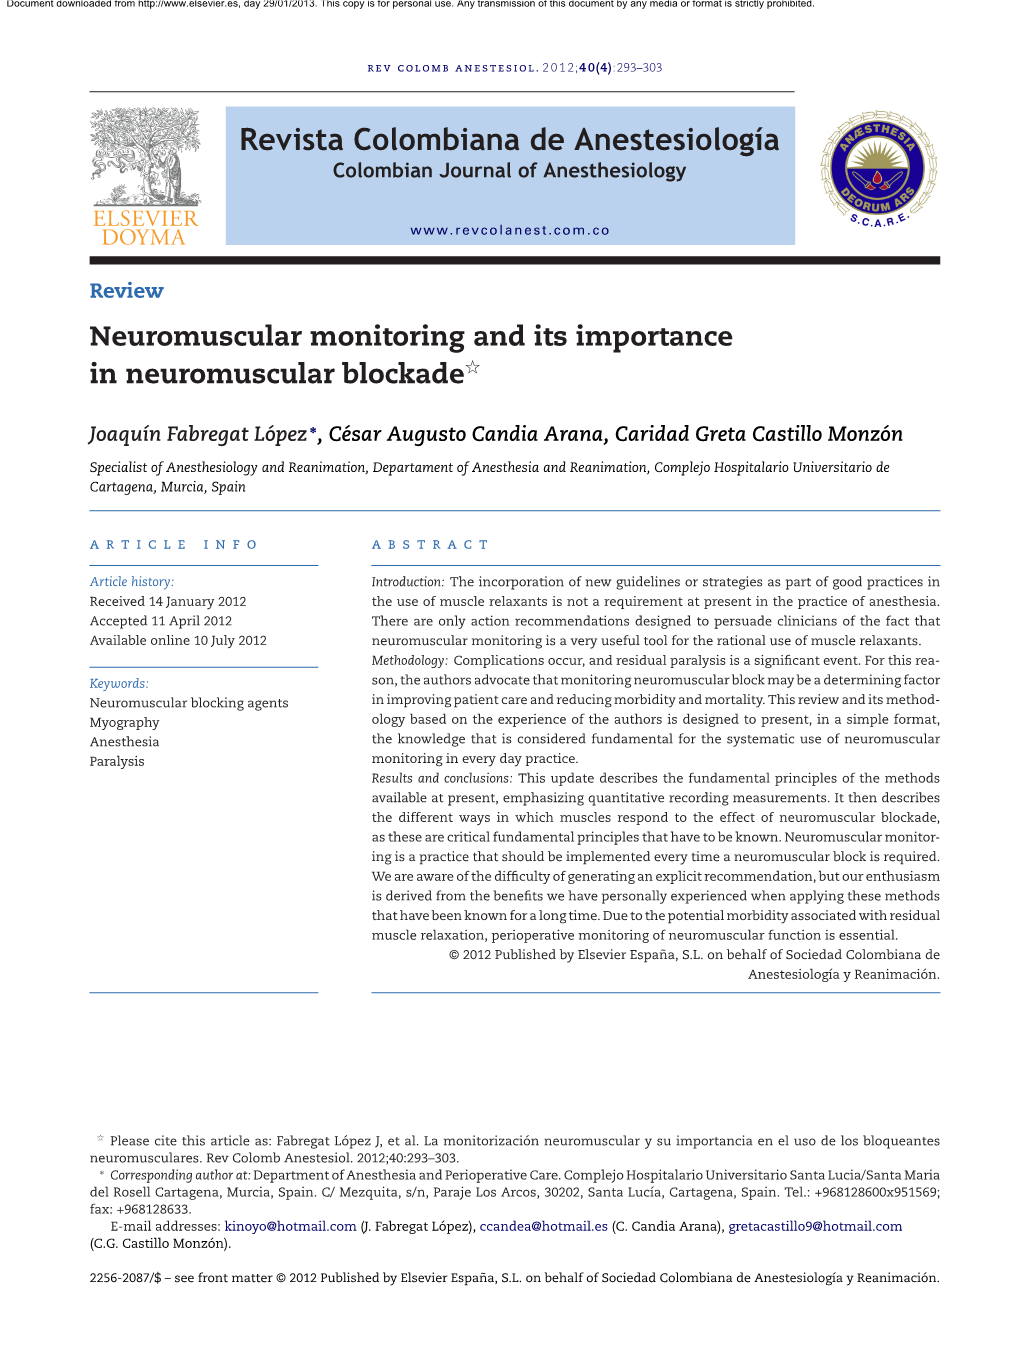 Neuromuscular Monitoring and Its Importance in Neuromuscular Blockadeଝ